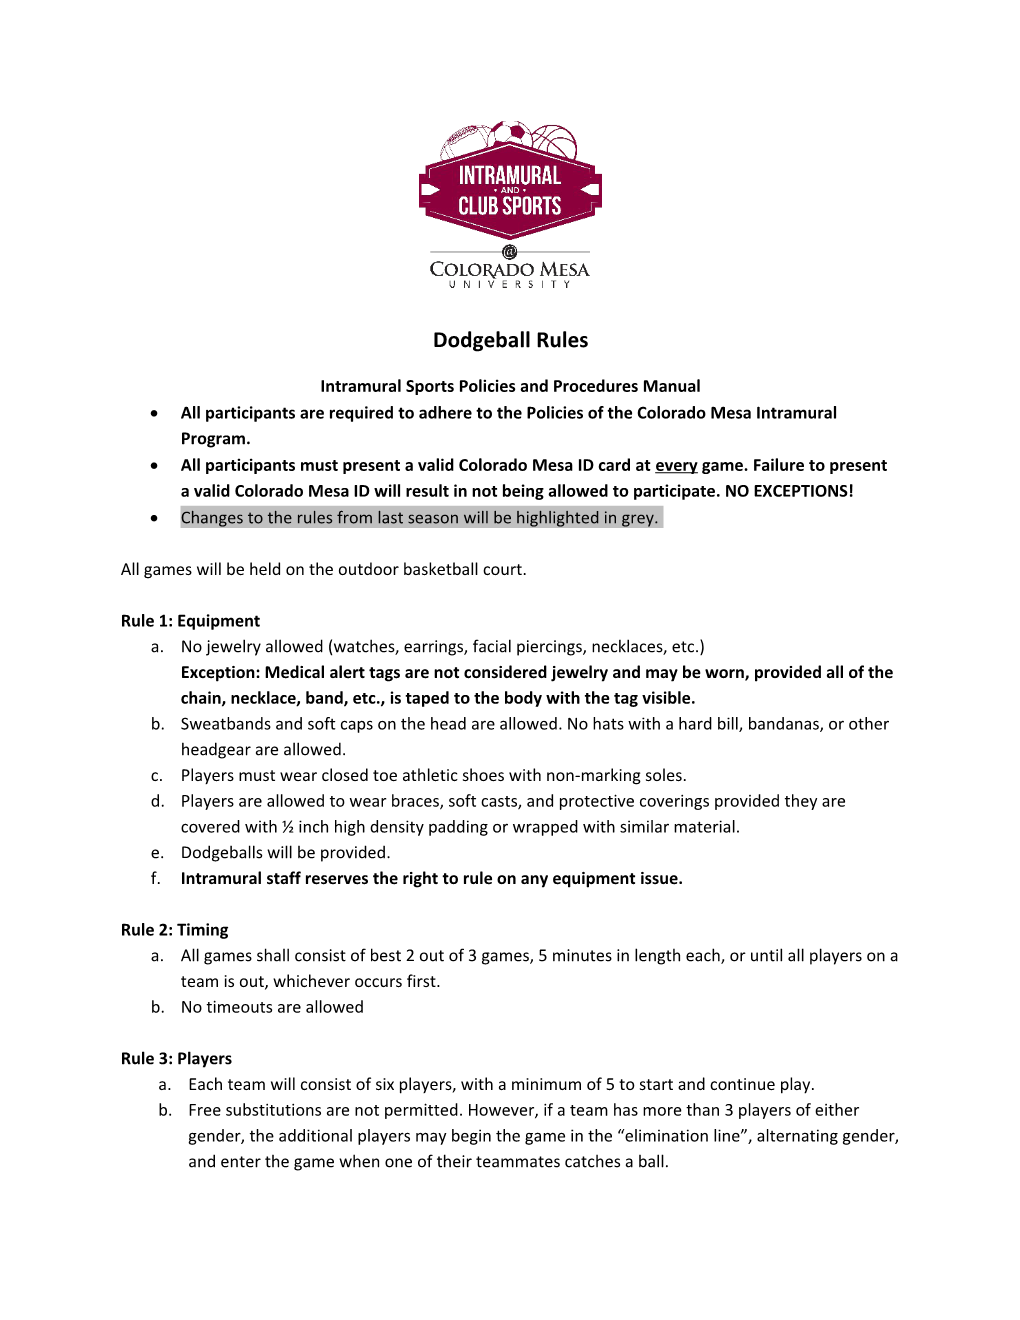 Intramural Sports Policies and Procedures Manual